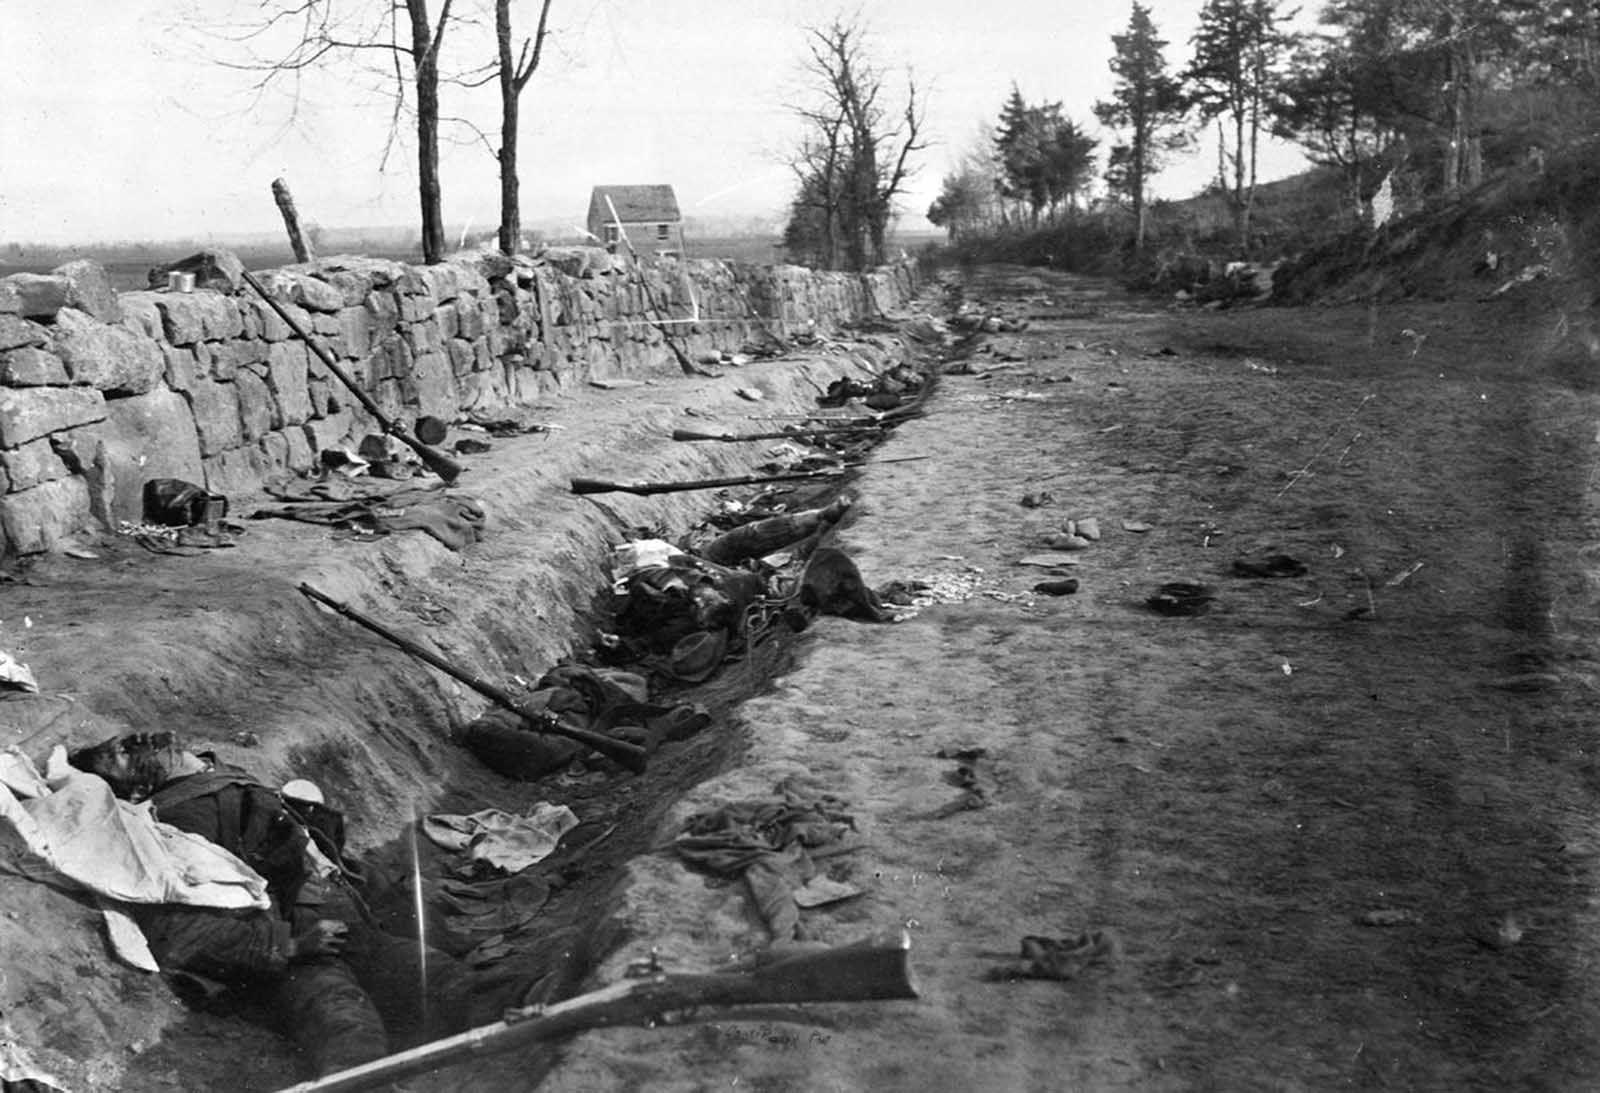 Confederate dead lie among rifles and other gear, behind a stone wall at the foot of Marye's Heights near Fredericksburg, Virginia on May 3, 1863. Union forces penetrated the Confederate lines at this point, during the Second Battle of Fredericksburg.